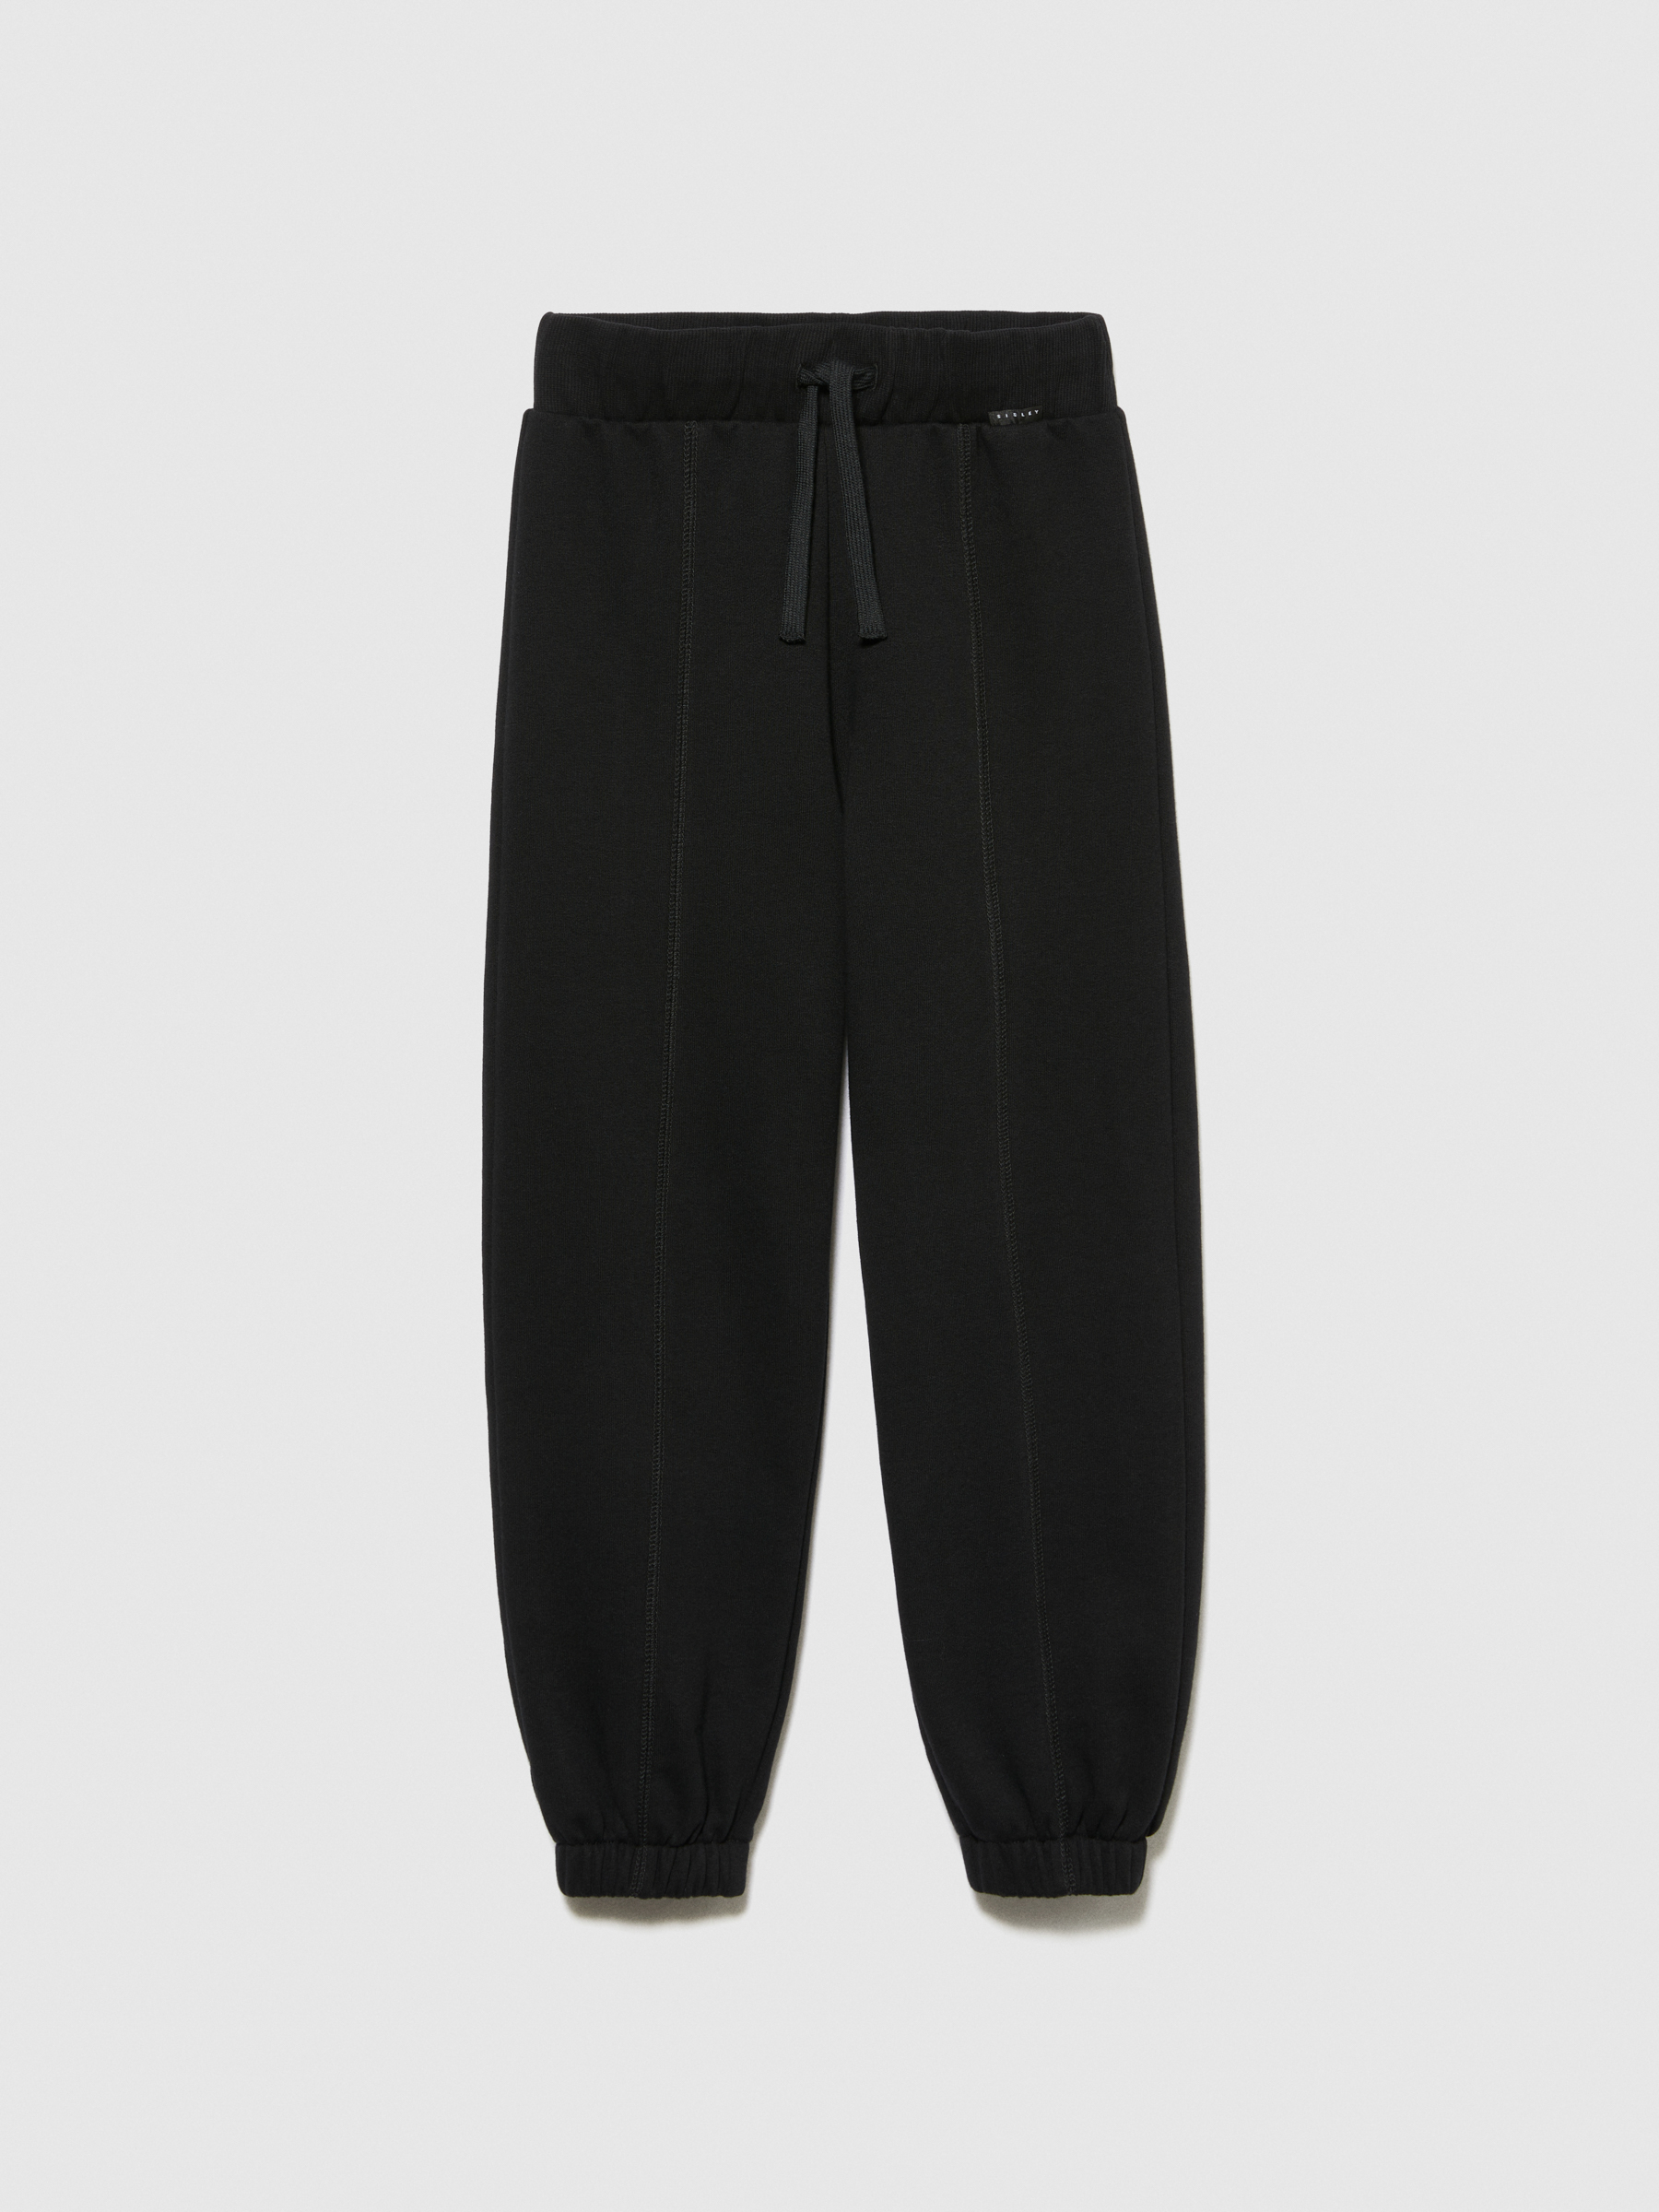 Sisley Young - Oversized Fit Joggers, Woman, Black, Size: L